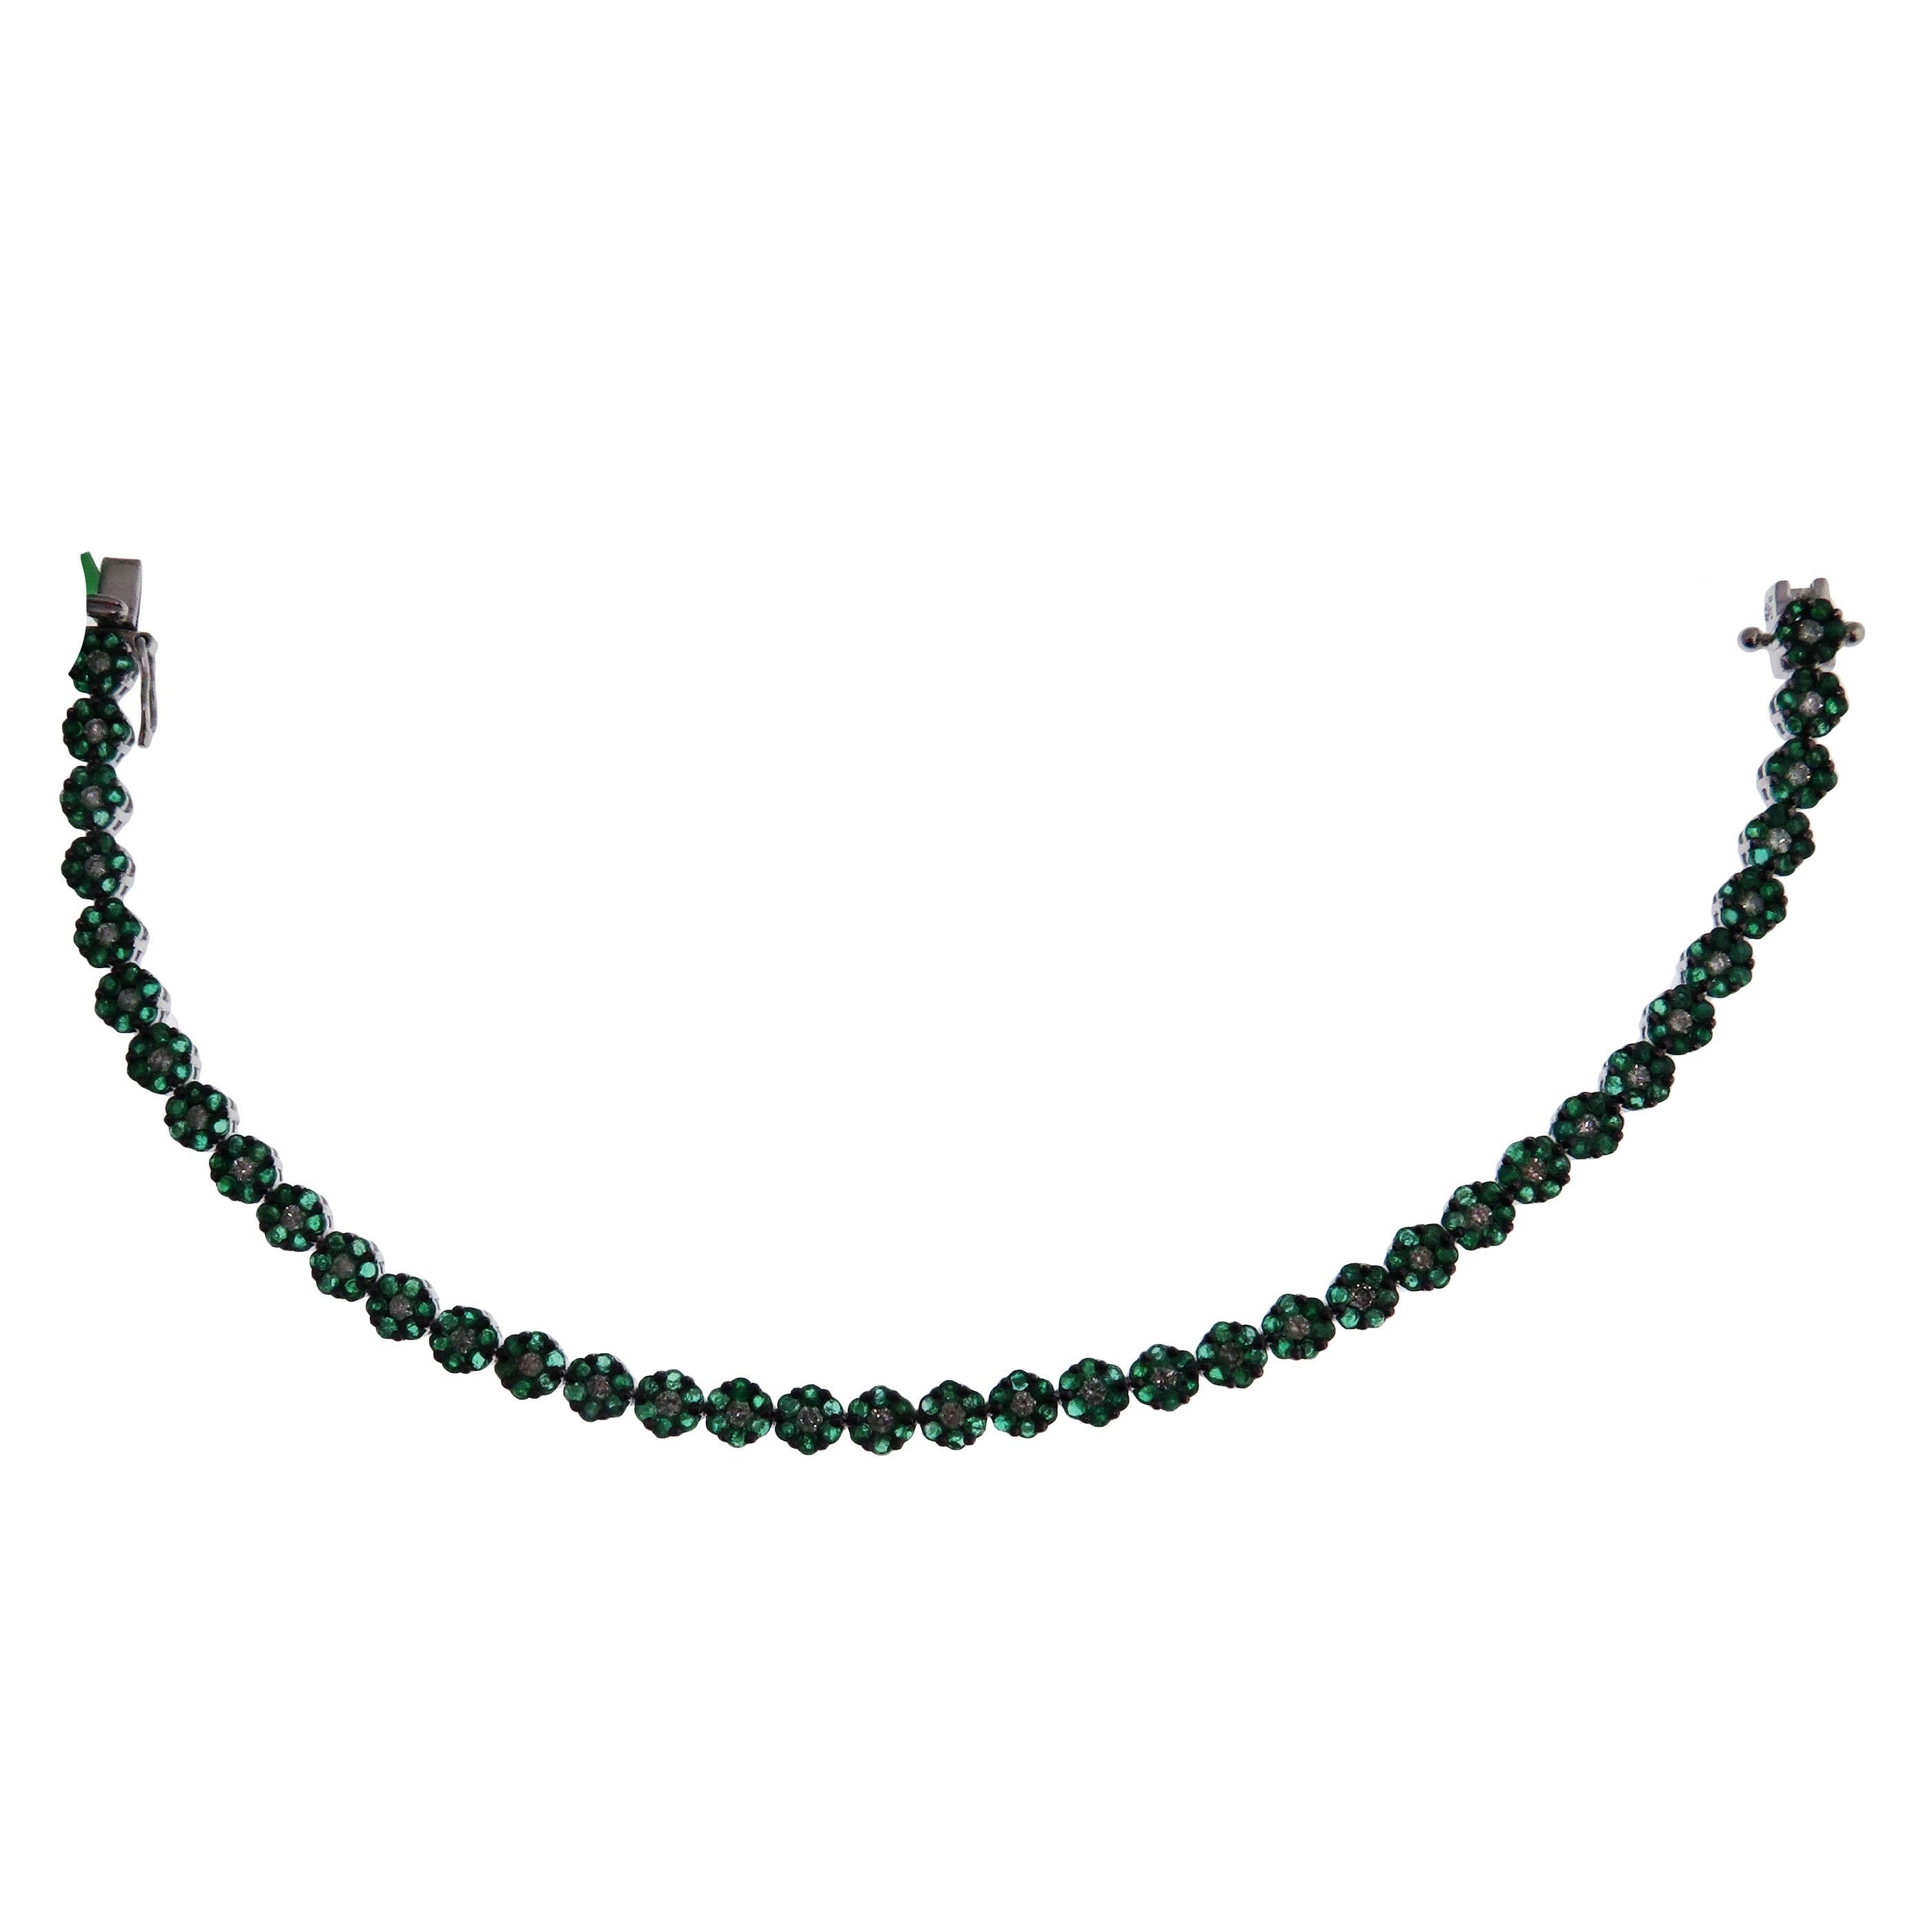 This bracelet is crafted in 18-karat white gold, weighing approximately 0.85 total carats of SI Quality white diamonds and 3.55 total carats of Emerald stones. Beautiful black rhodium accent on the bracelet. 

Bracelet is approximately 7